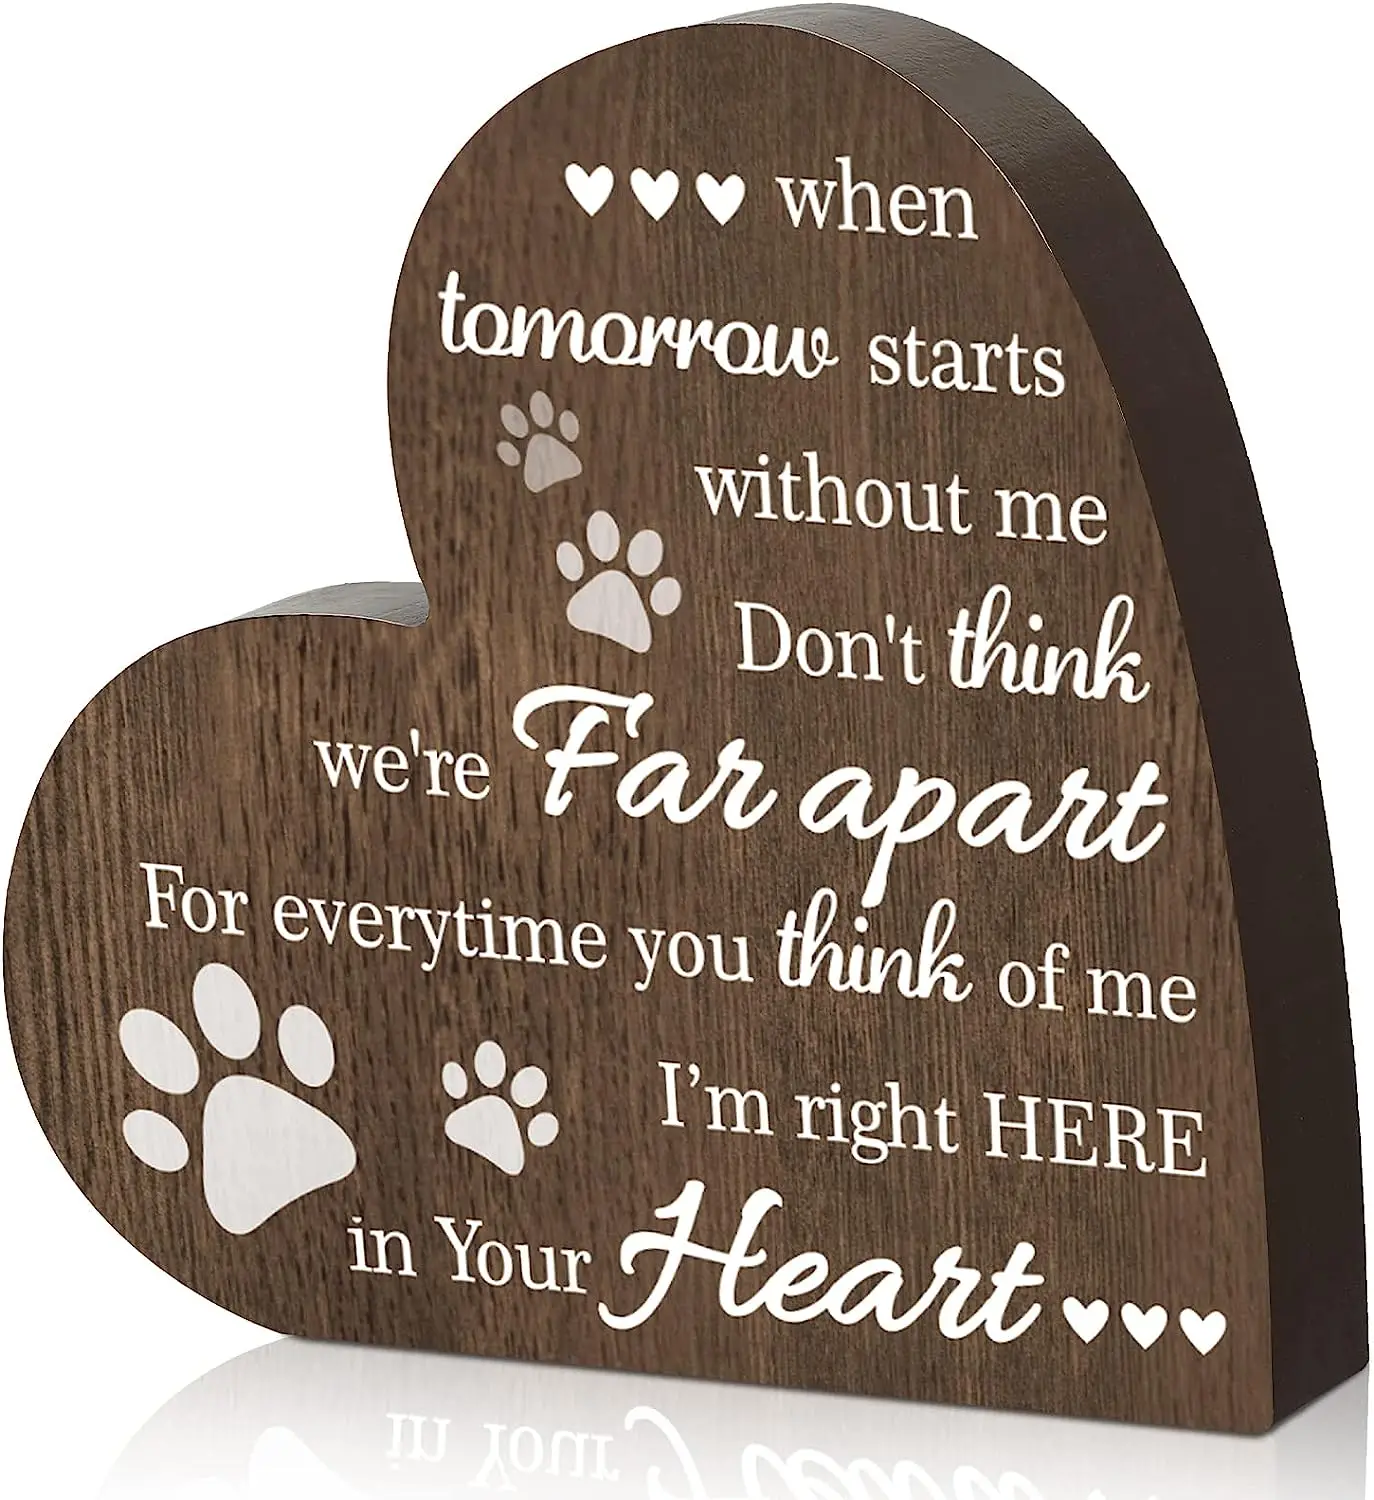 

Pet Memorial Gifts Heart Shaped Wood Dog Cat Sympathy Condolence Gifts Factory Wholesale Hot sell